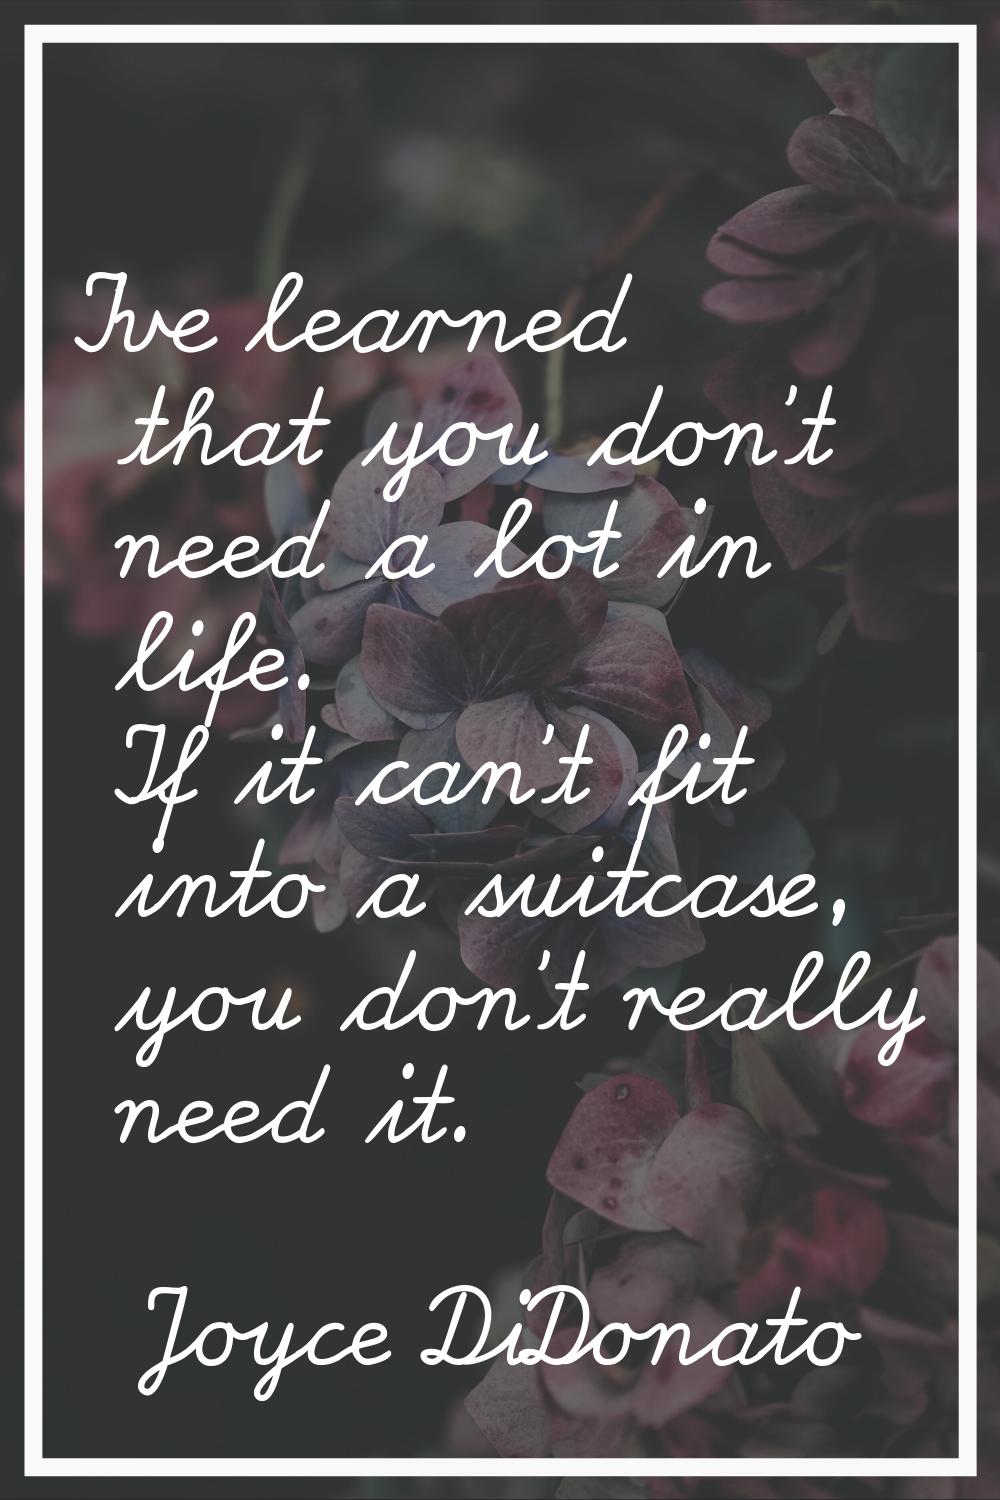 I've learned that you don't need a lot in life. If it can't fit into a suitcase, you don't really n